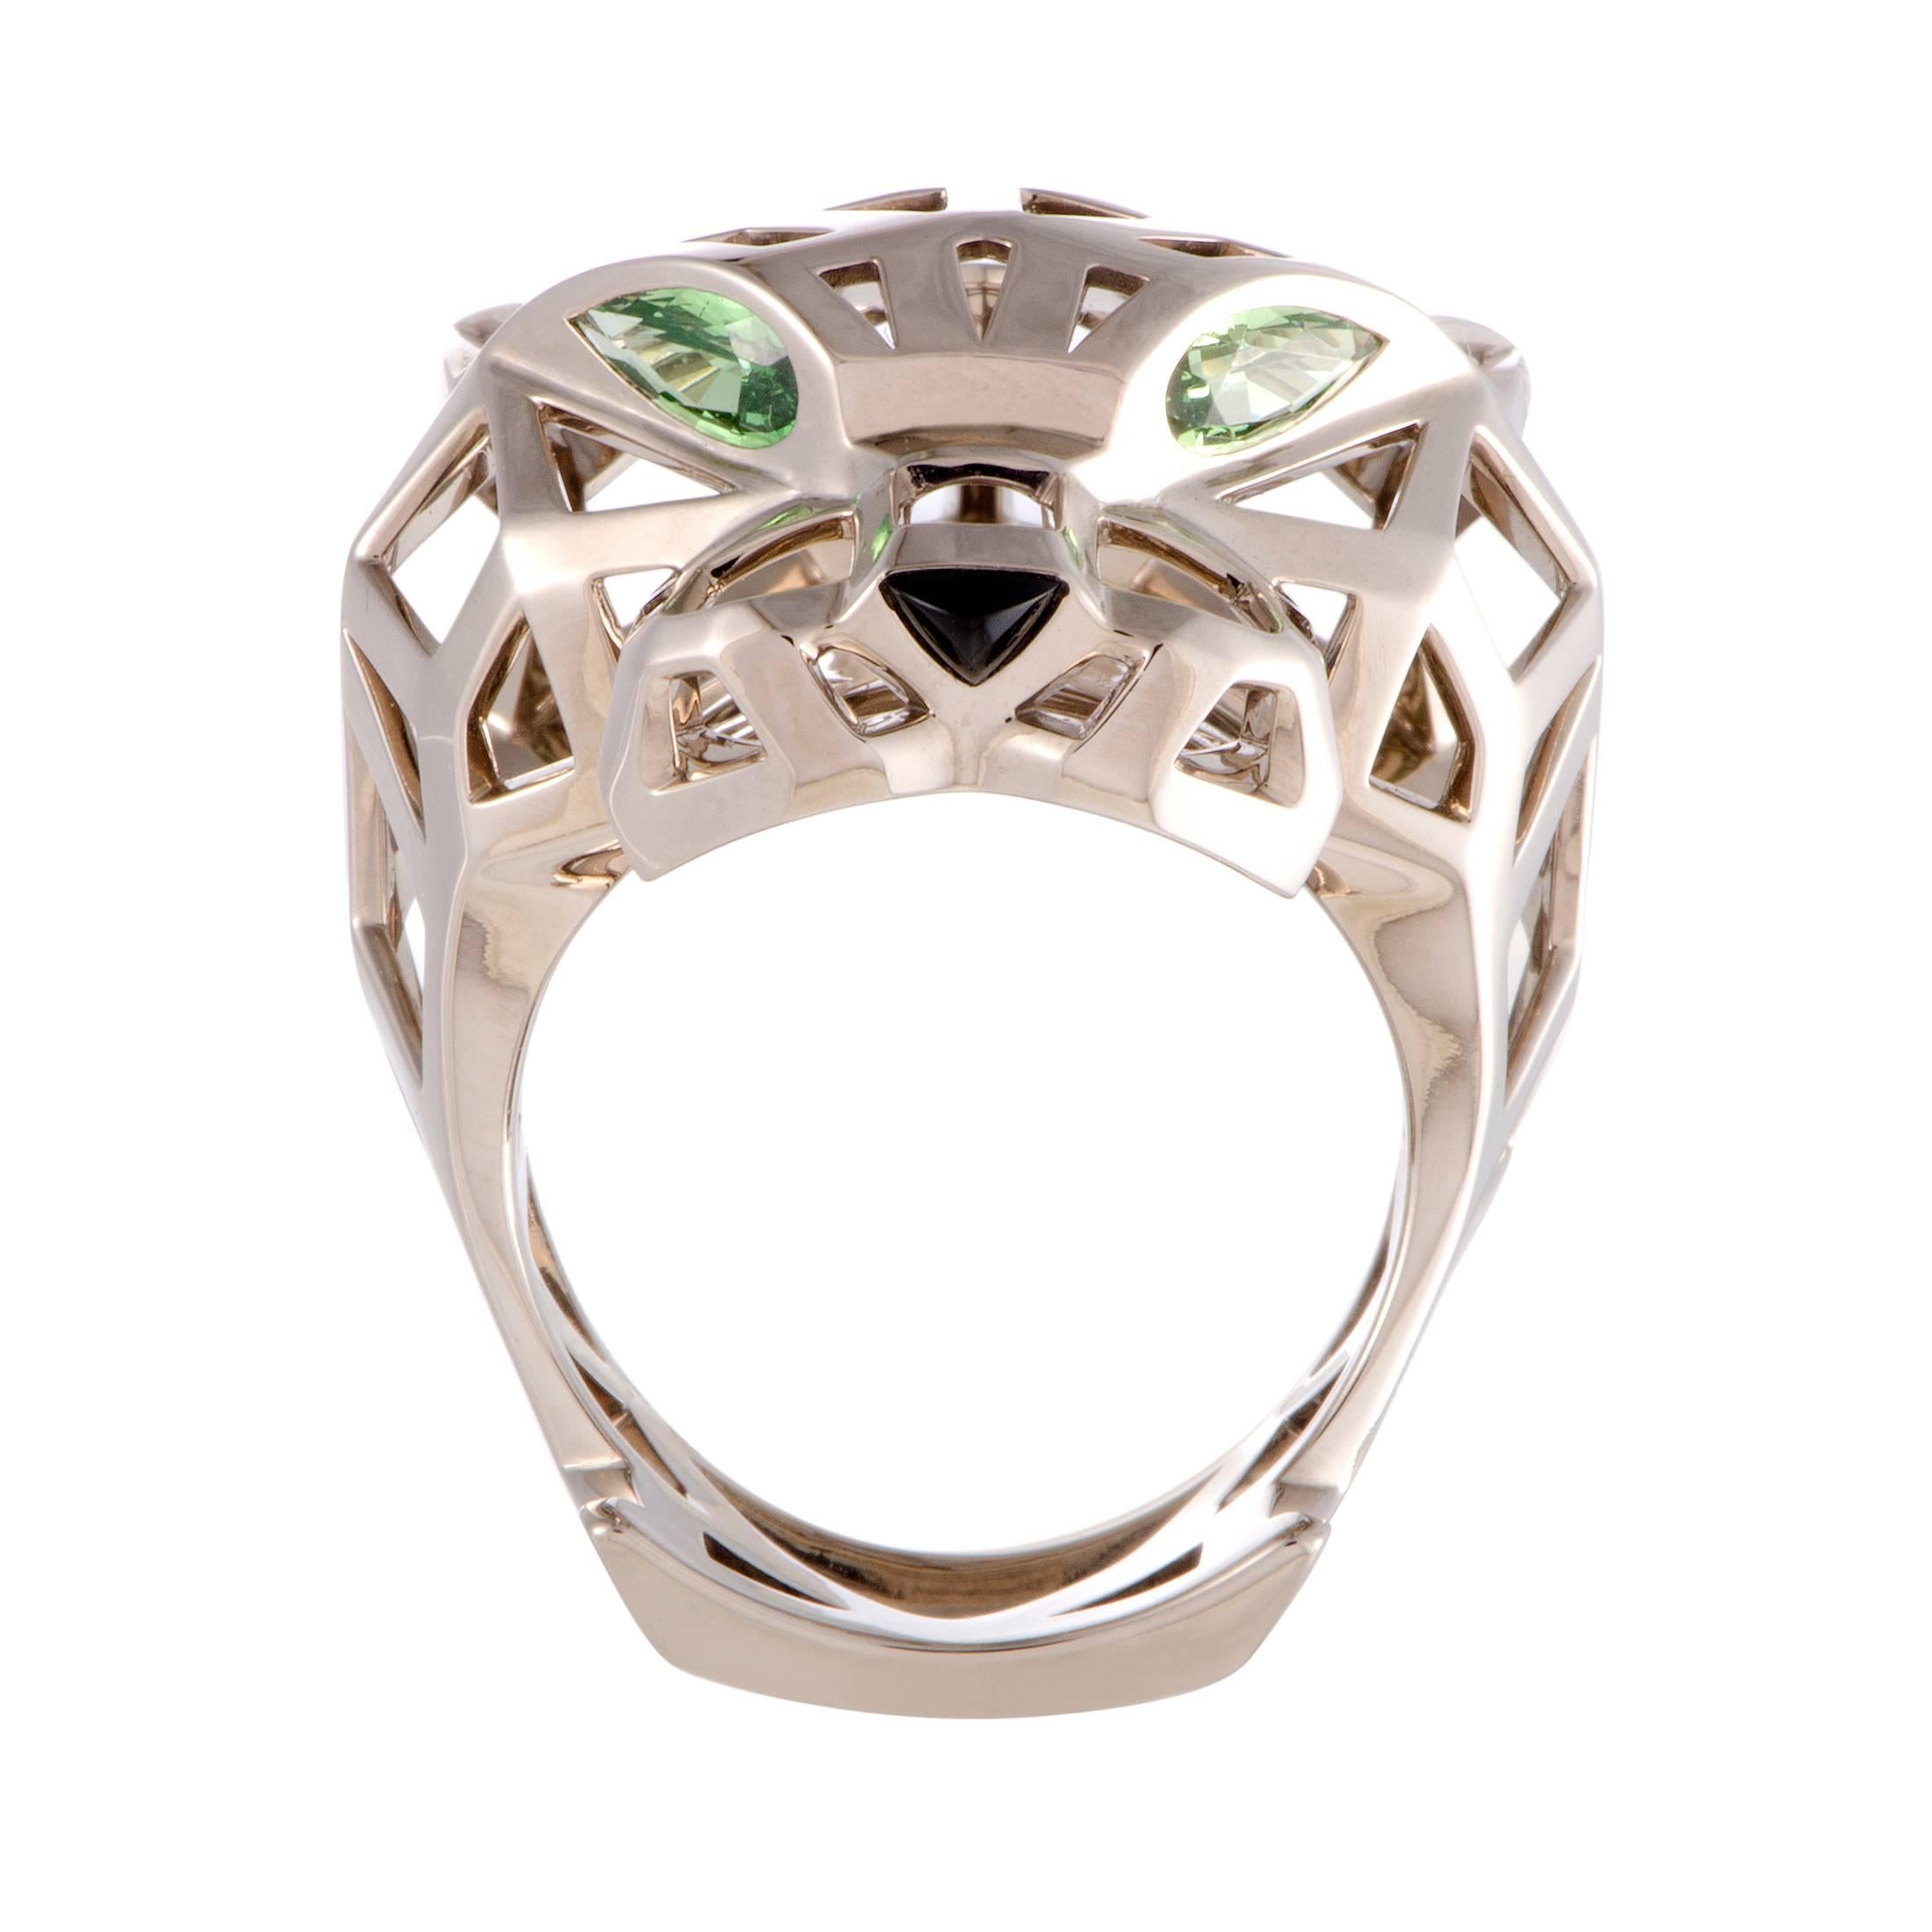 Presented within the iconic “Panthère de Cartier” collection with designs inspired by Cartier’s symbolic animal that can be both fierce and playful, this stunning ring boasts an incredibly masculine appeal. The ring is made of 18K white gold and